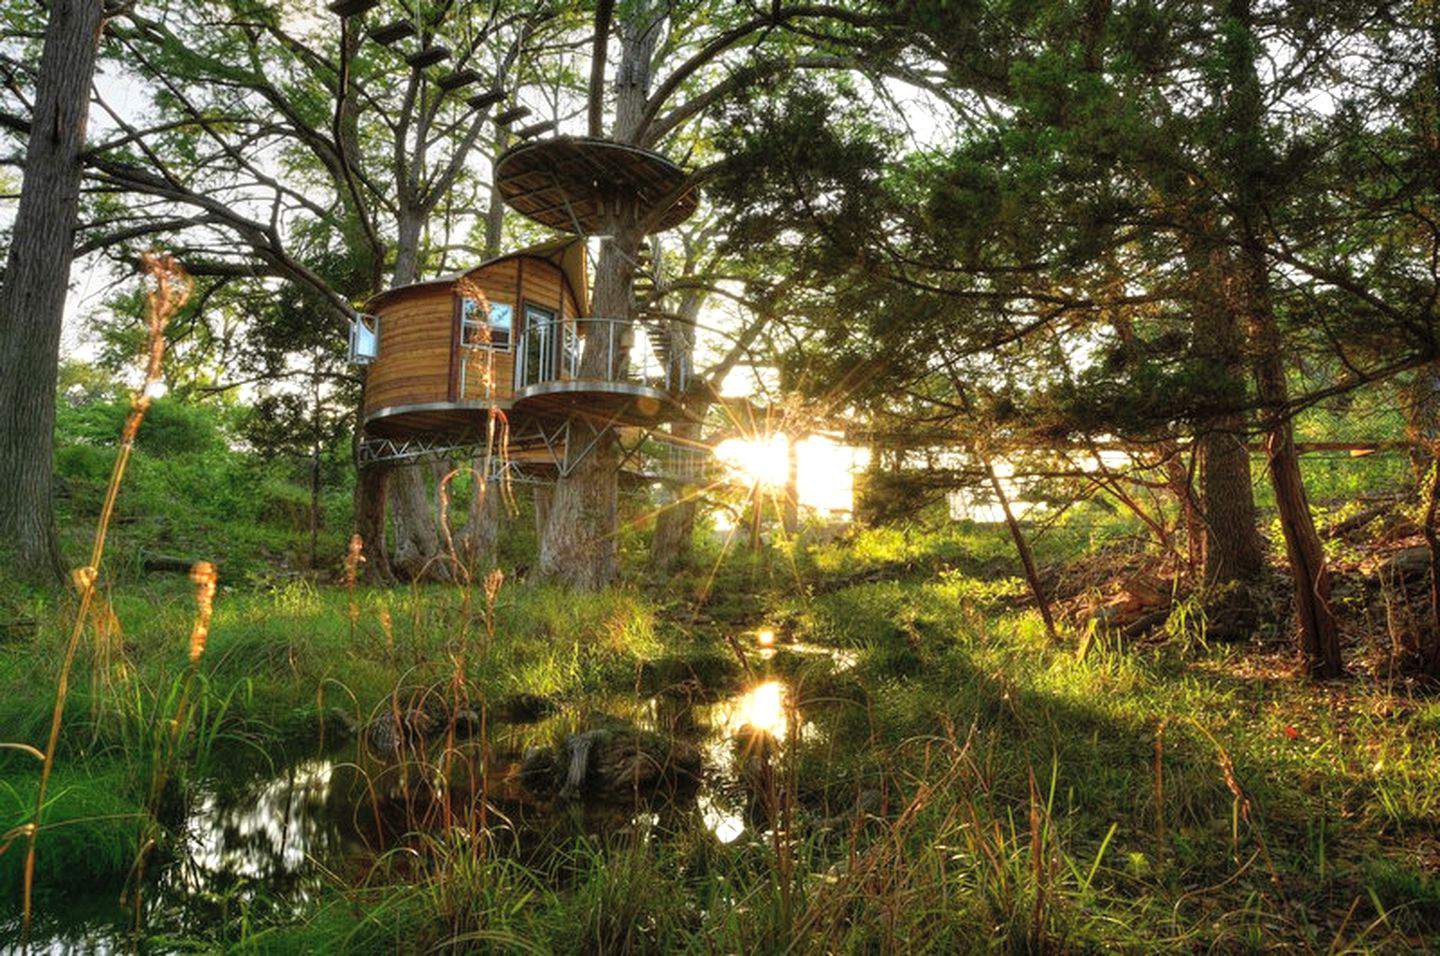 10 most popular glamping destinations in Texas, according to GlampingHub